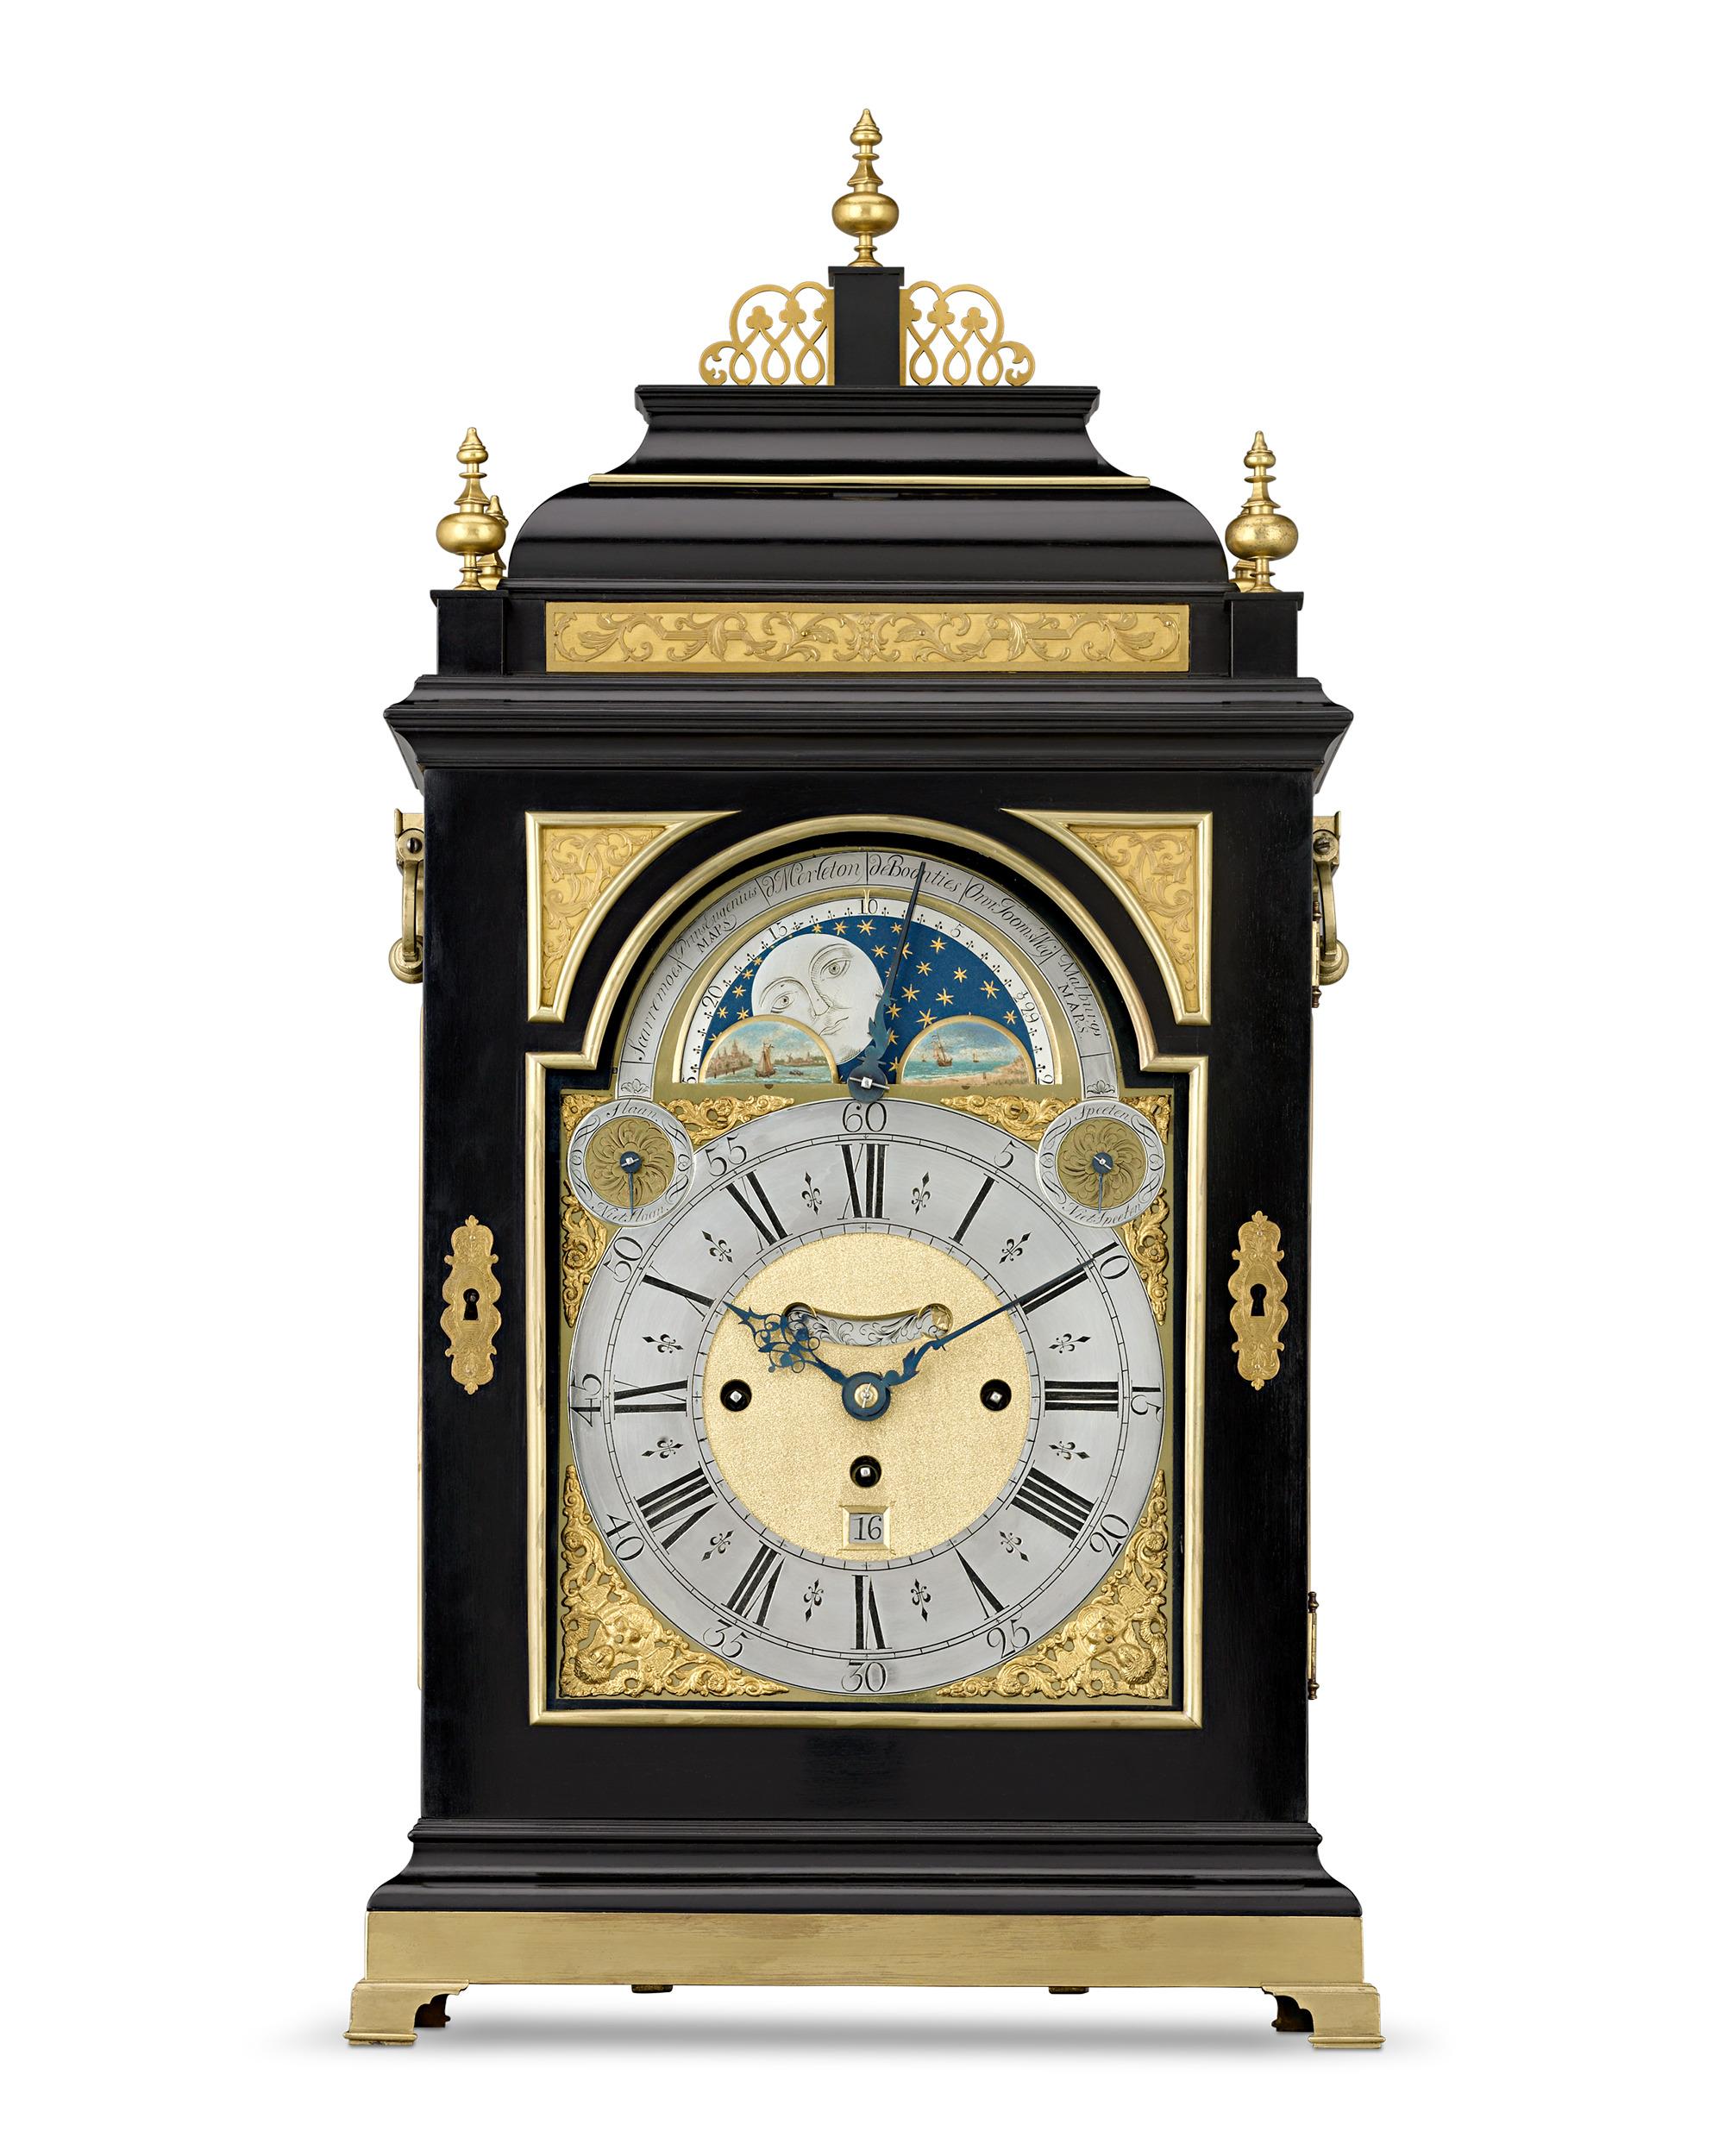 This remarkable 18th-century George III Dutch musical bracket clock is in pristine condition— both the mechanics and the body of the clock are emblematic of the era's exemplary craftsmanship. Encased in elegant ebony and accentuated with brass